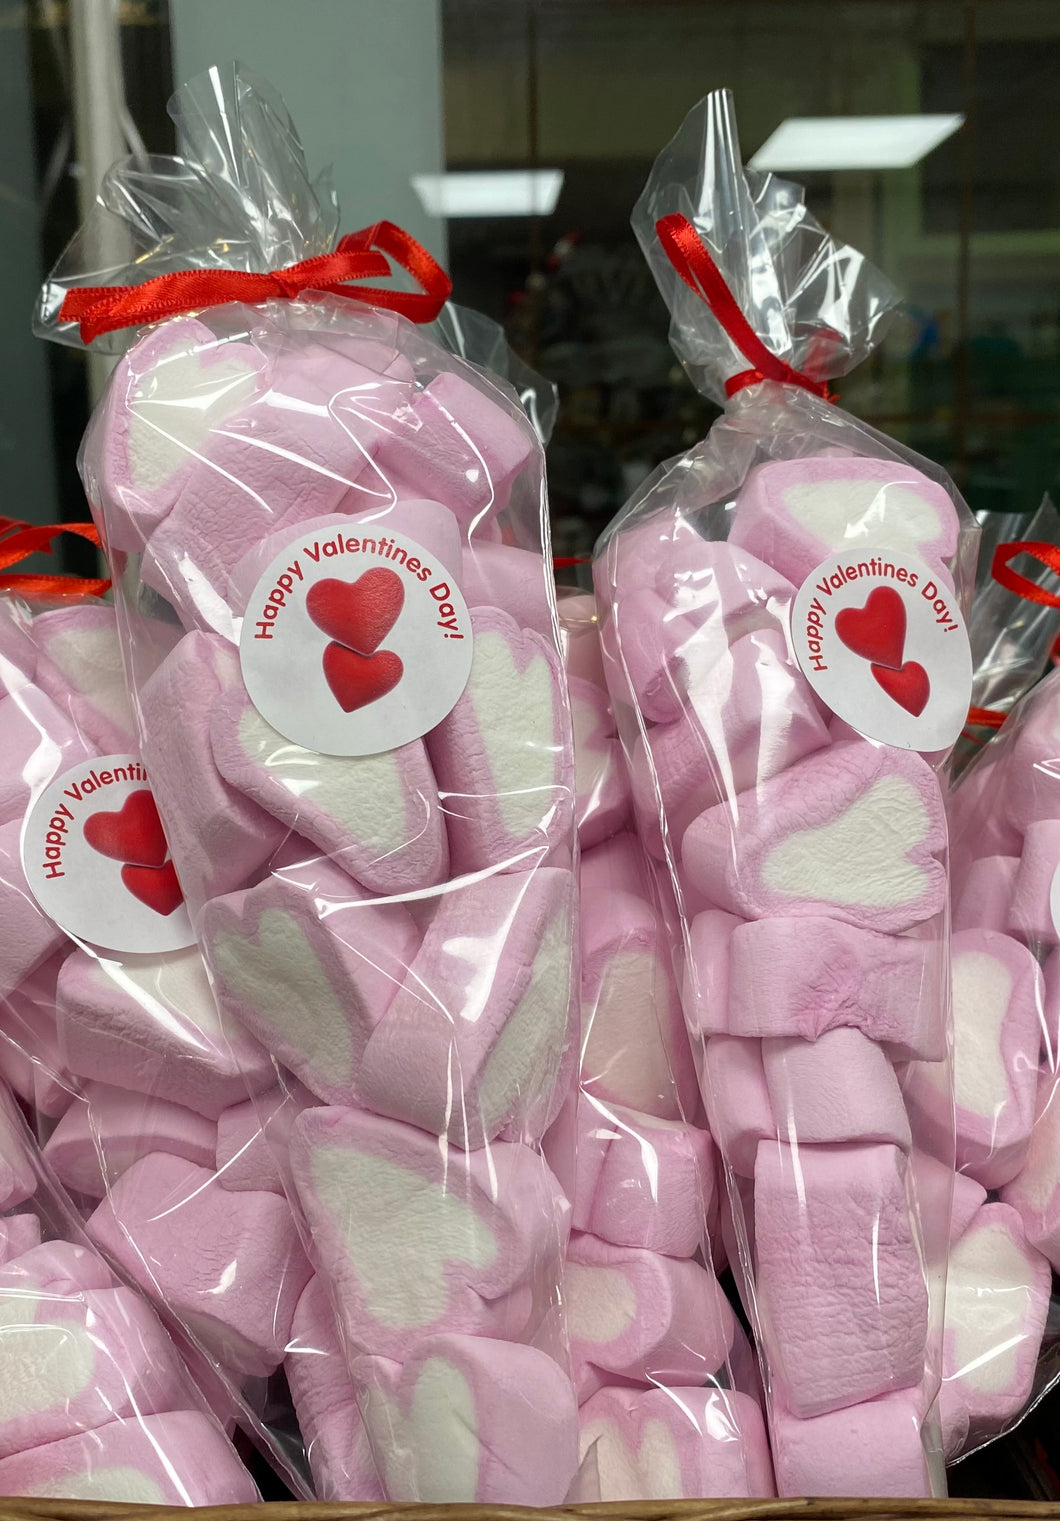 Sweet cone of heart marshmallows (Valentine's gift)(flumps)